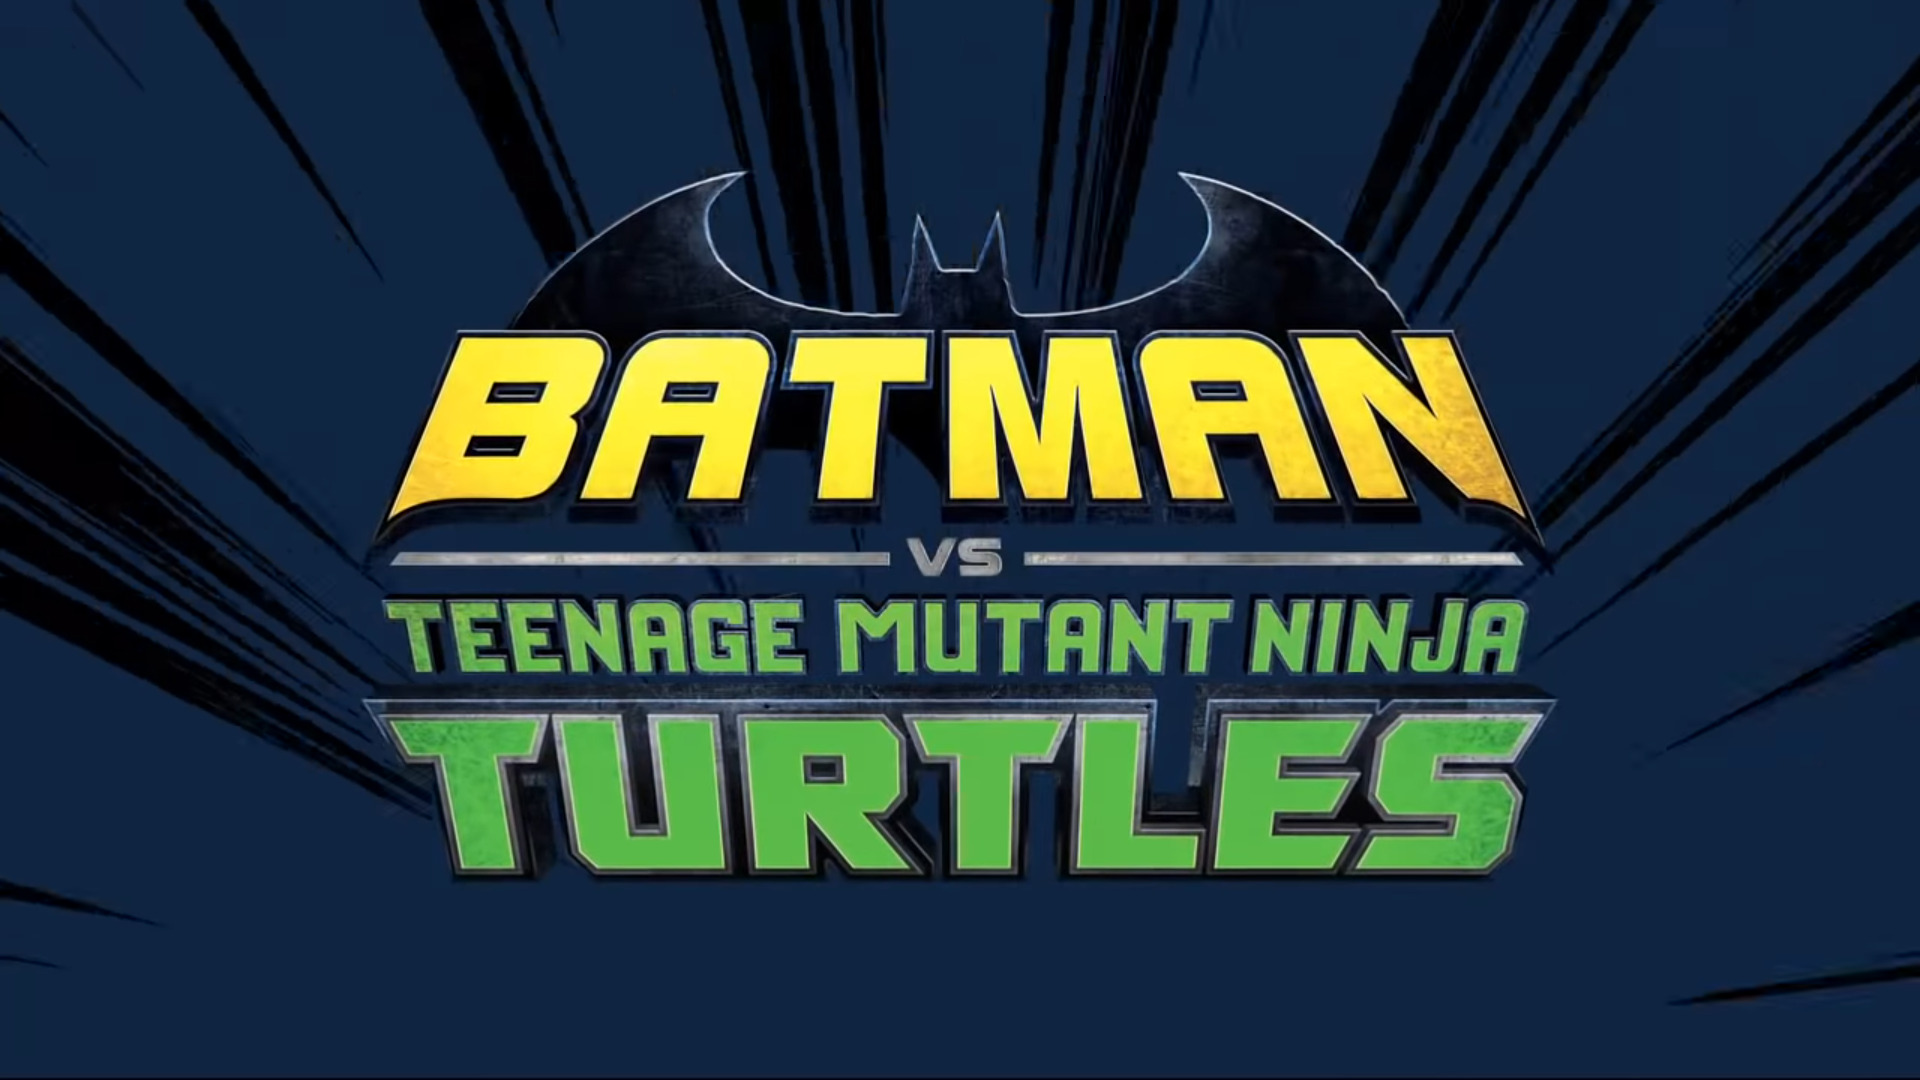 https://static.wikia.nocookie.net/nickelodeon/images/0/04/Title-Batman_vs_TMNT.png/revision/latest?cb=20190312203048